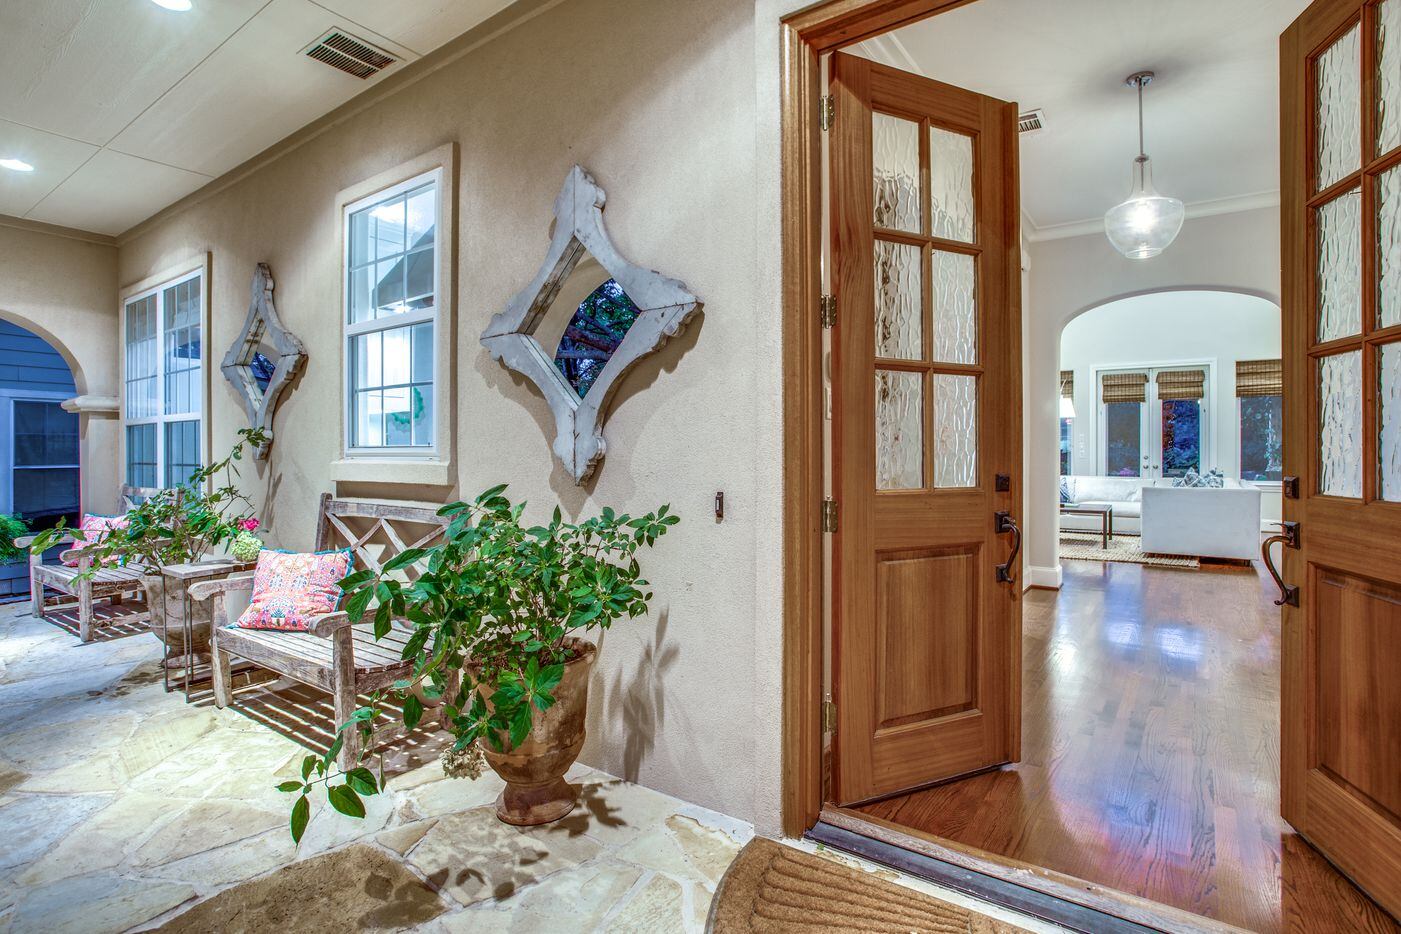 Take a look at the home at 9223 Biscayne Blvd. in Dallas.